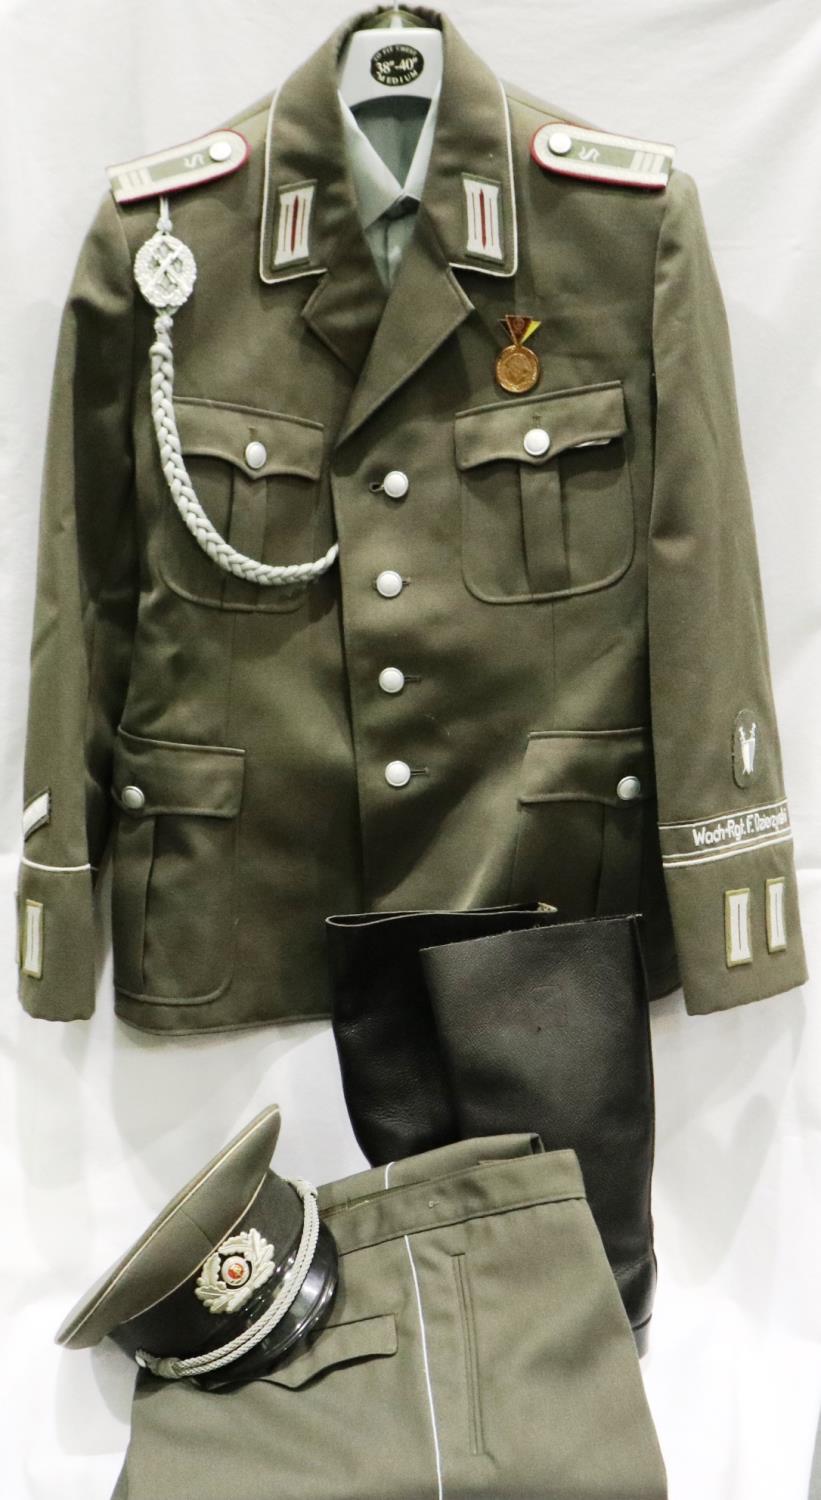 East German Armoured Division NCO uniform, comprising tunic, trousers, boots, and visor cap with